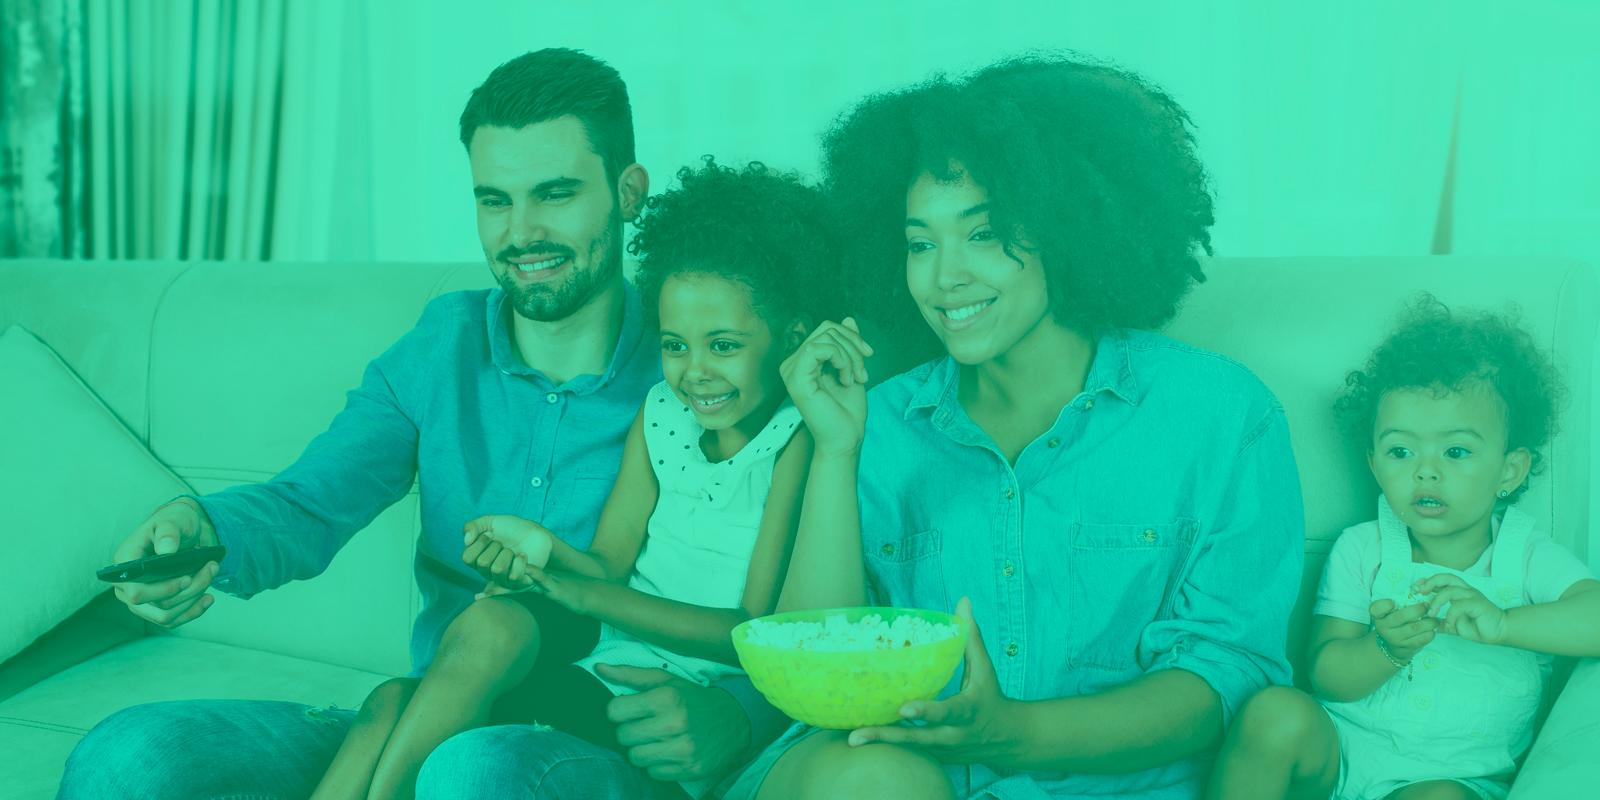 When Families Watch TV Together, Marketers Win